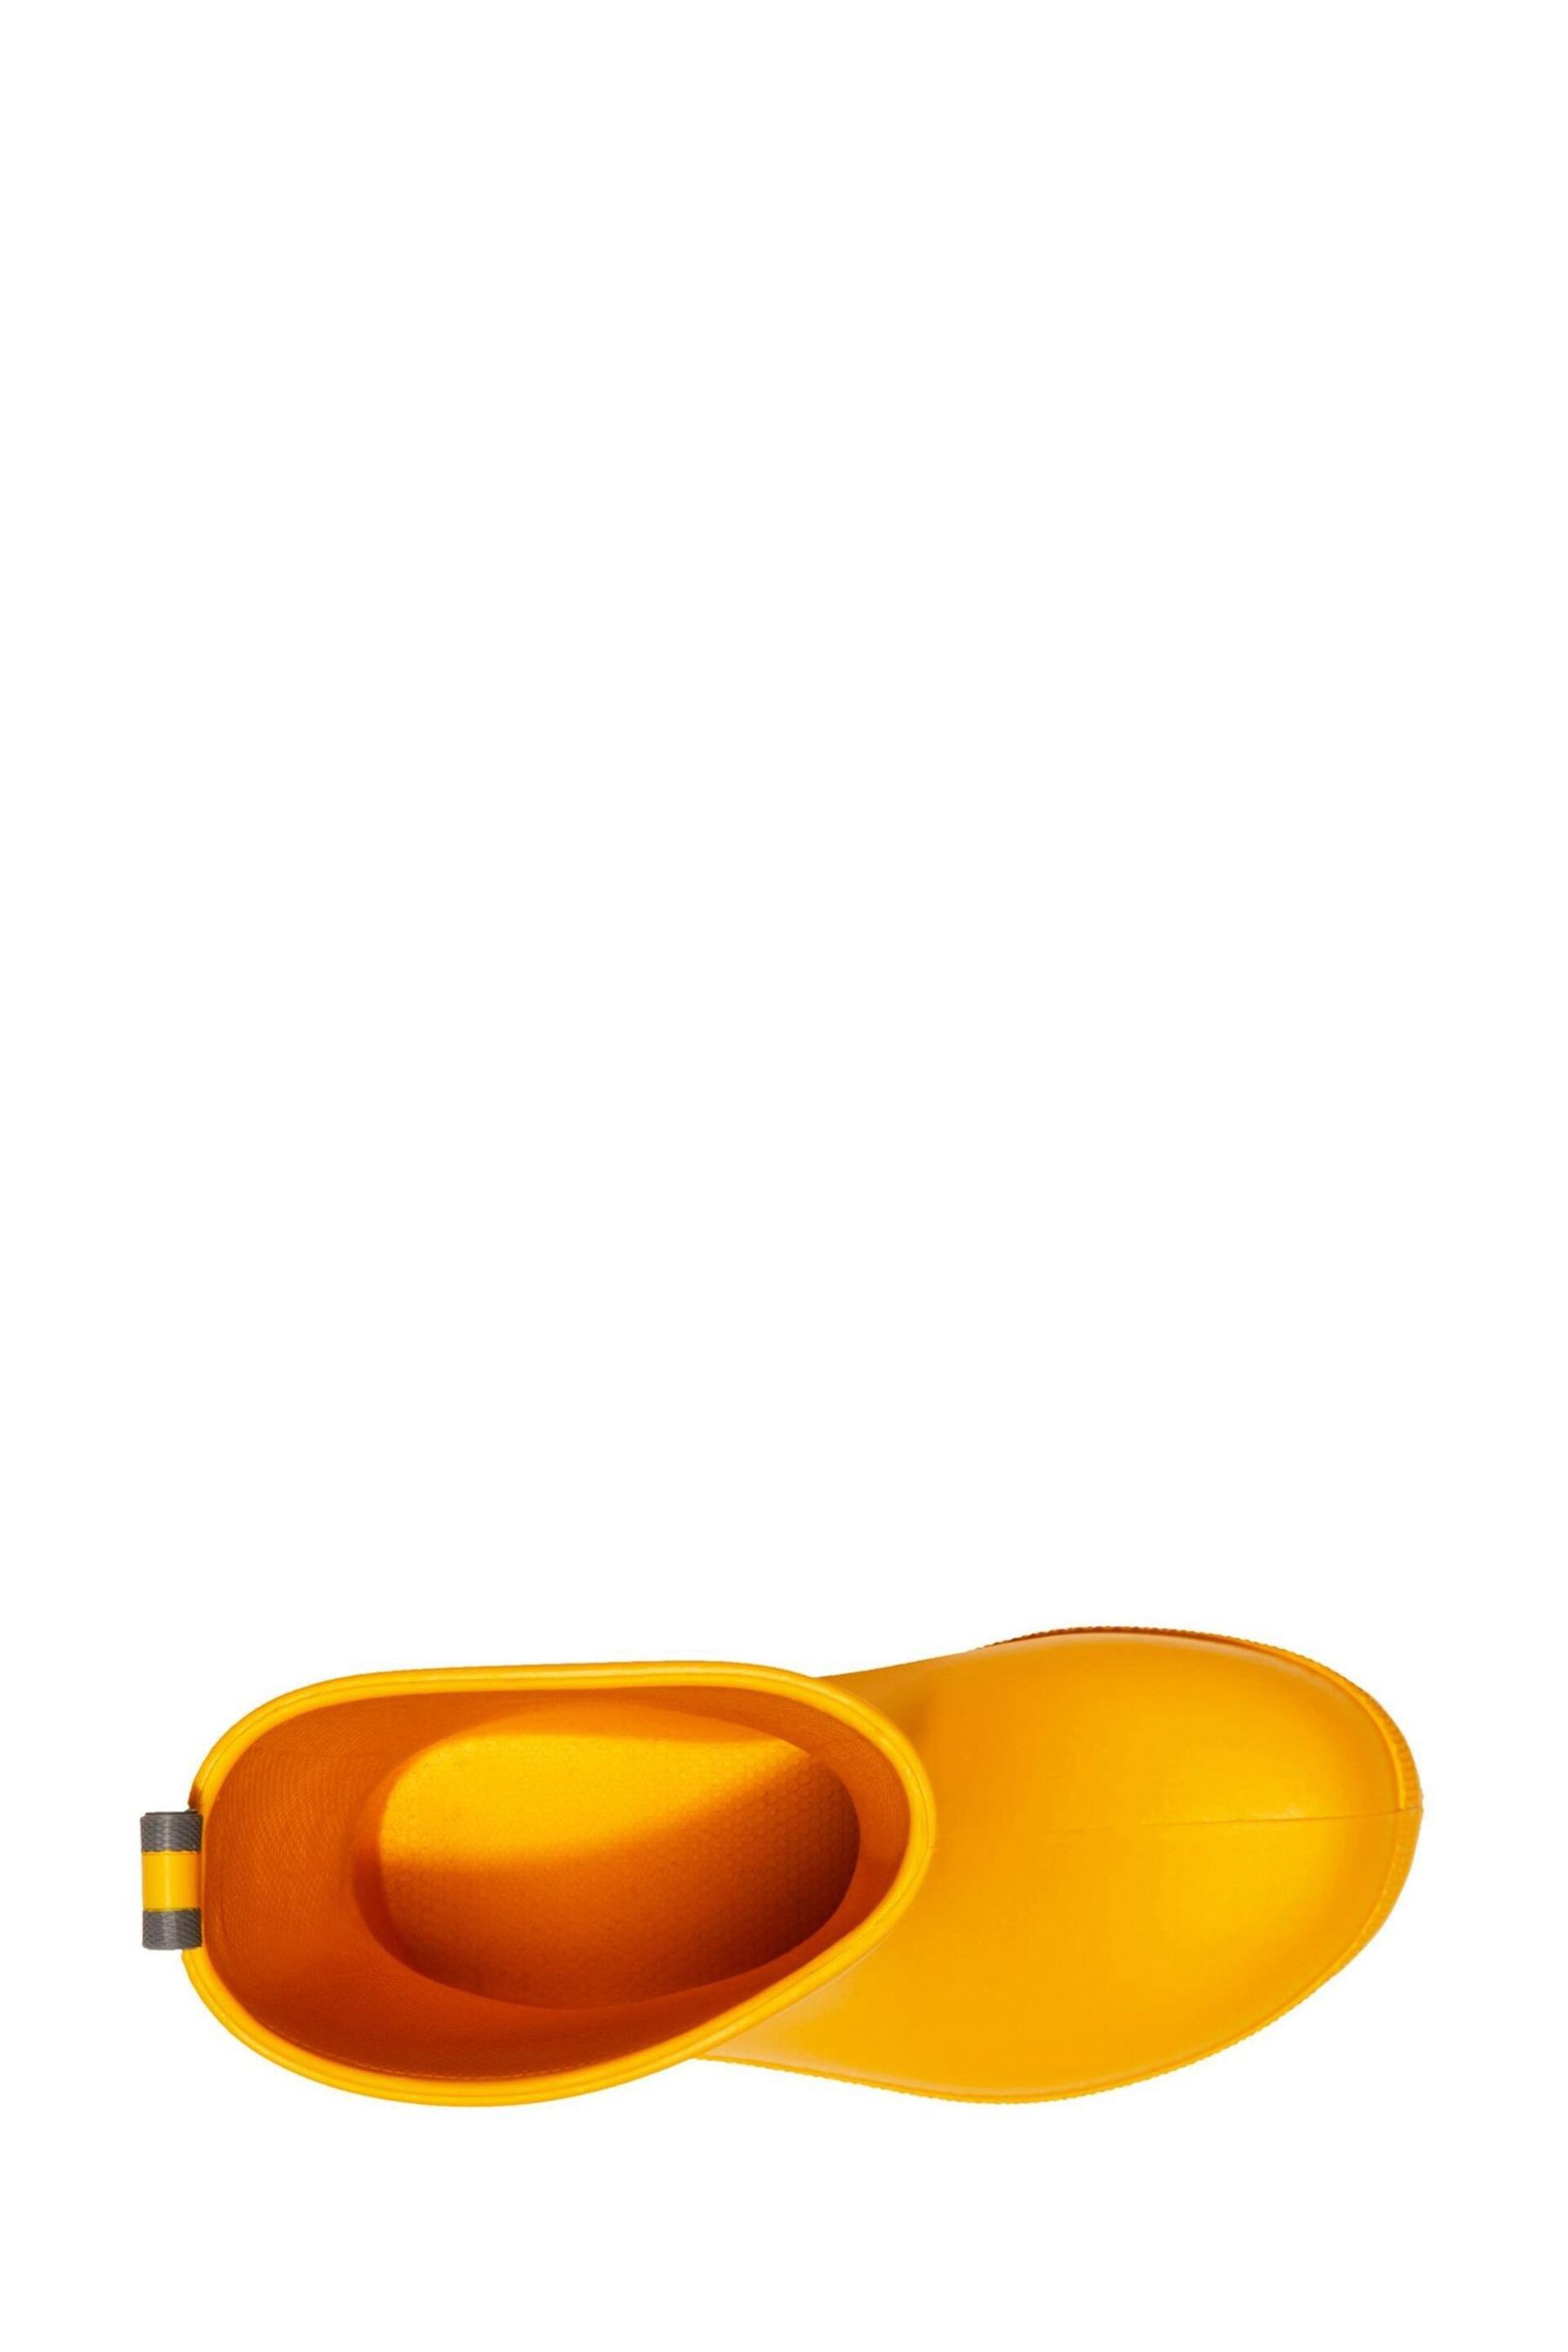 Totes Yellow Childrens Charley Welly Boots - Image 5 of 6